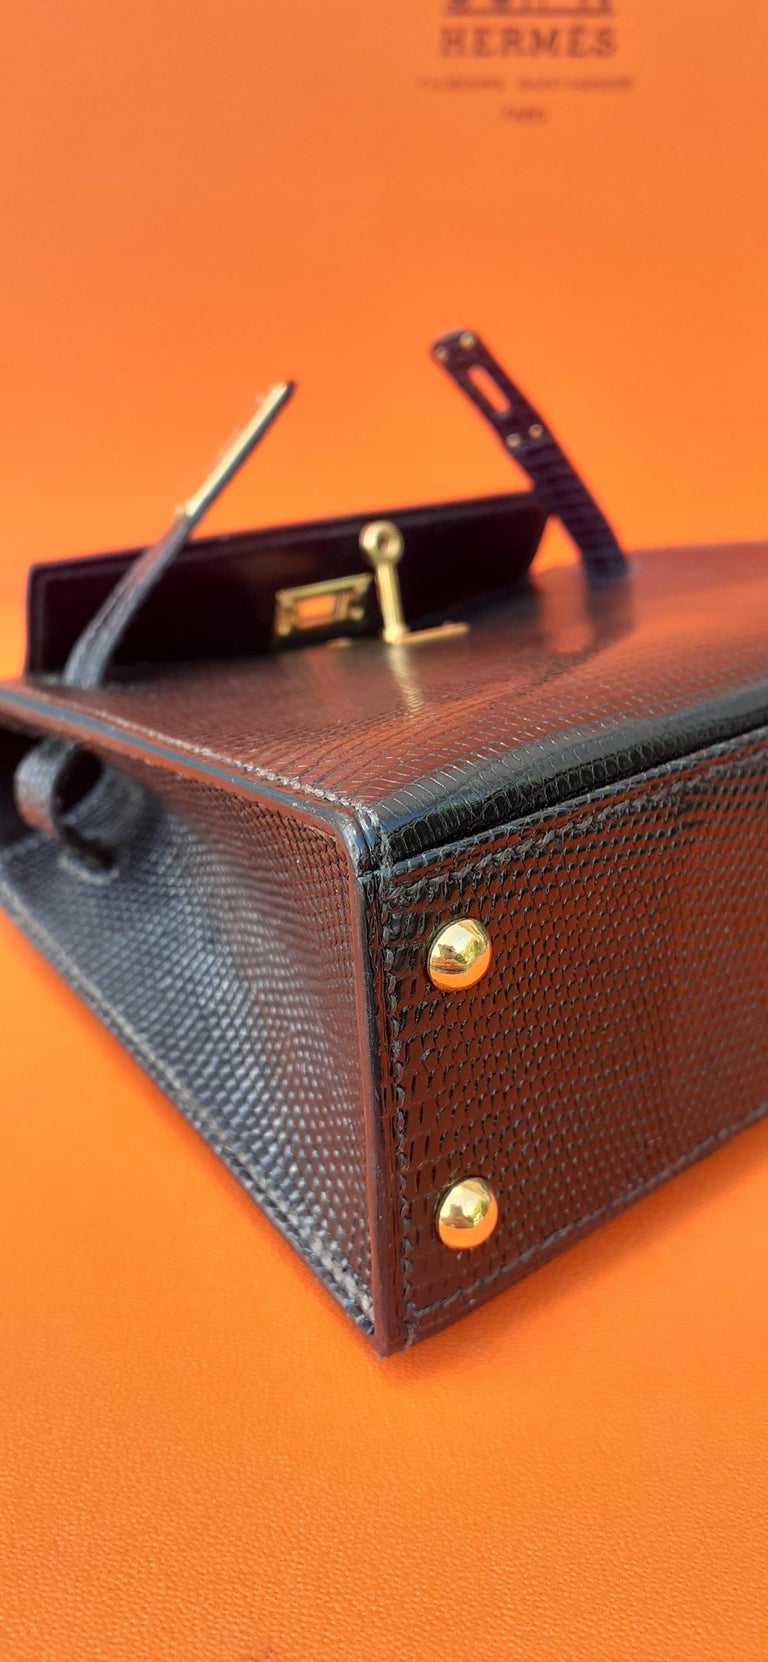 Video before ship out— mini kelly lizard #custombag #fyp #foryou #herm